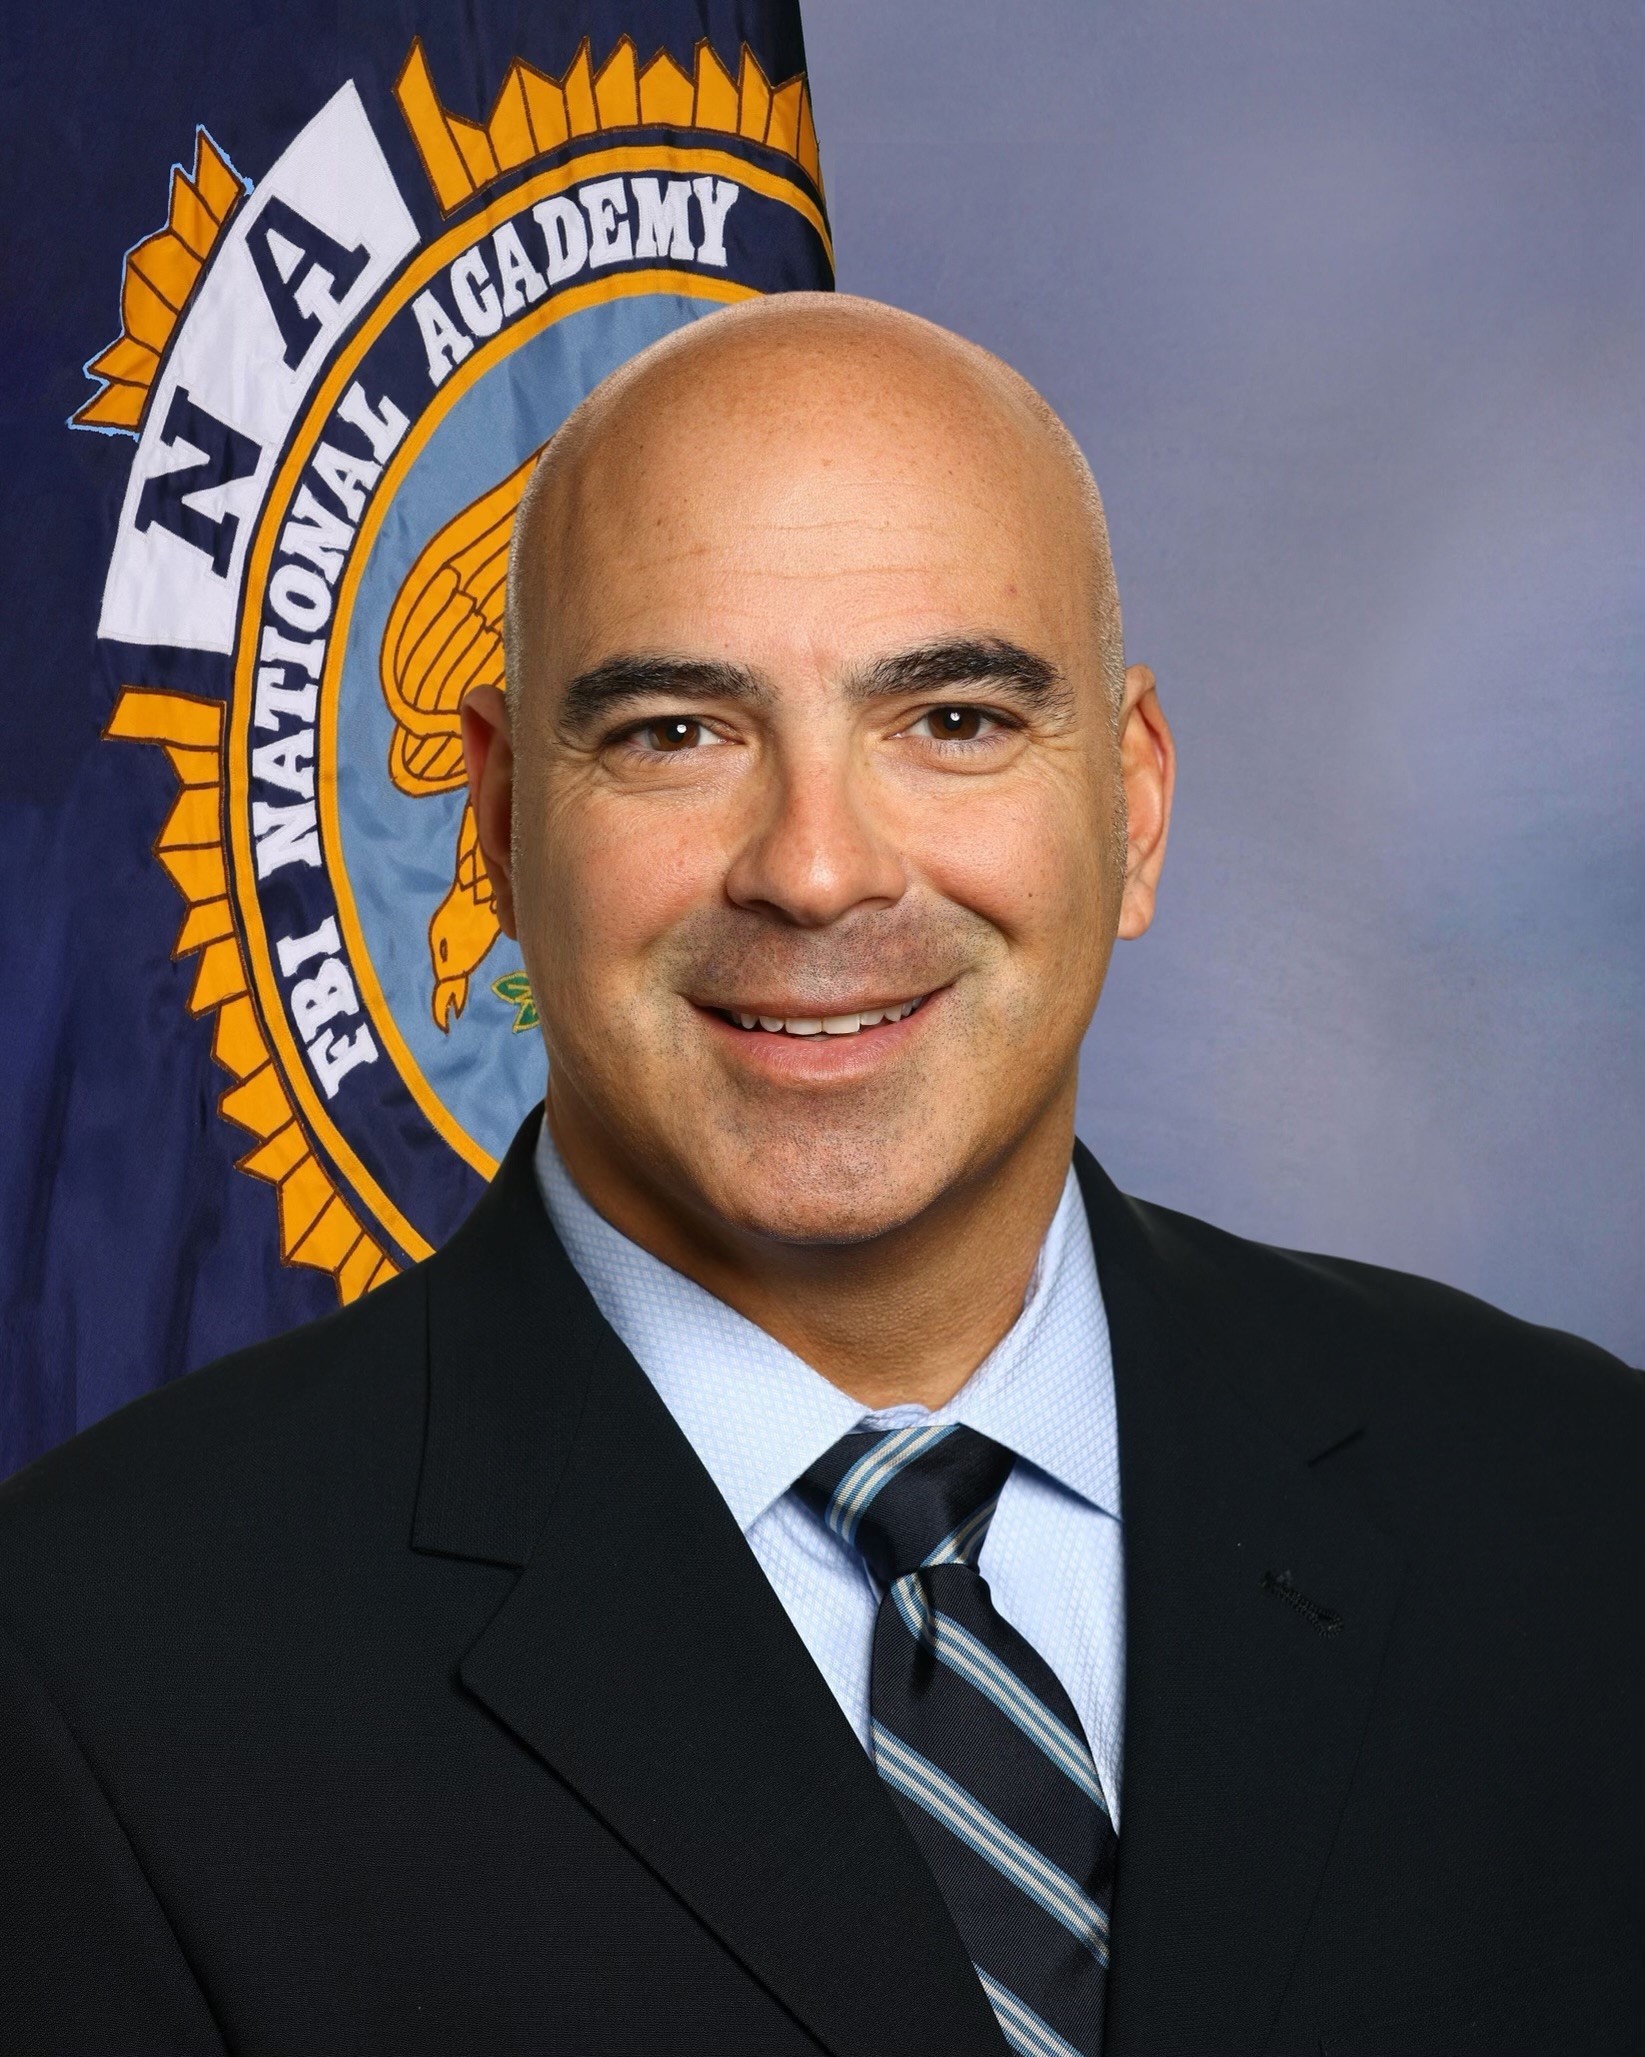 Professional Head shot of Police Chief Rossi from the FBI Academy